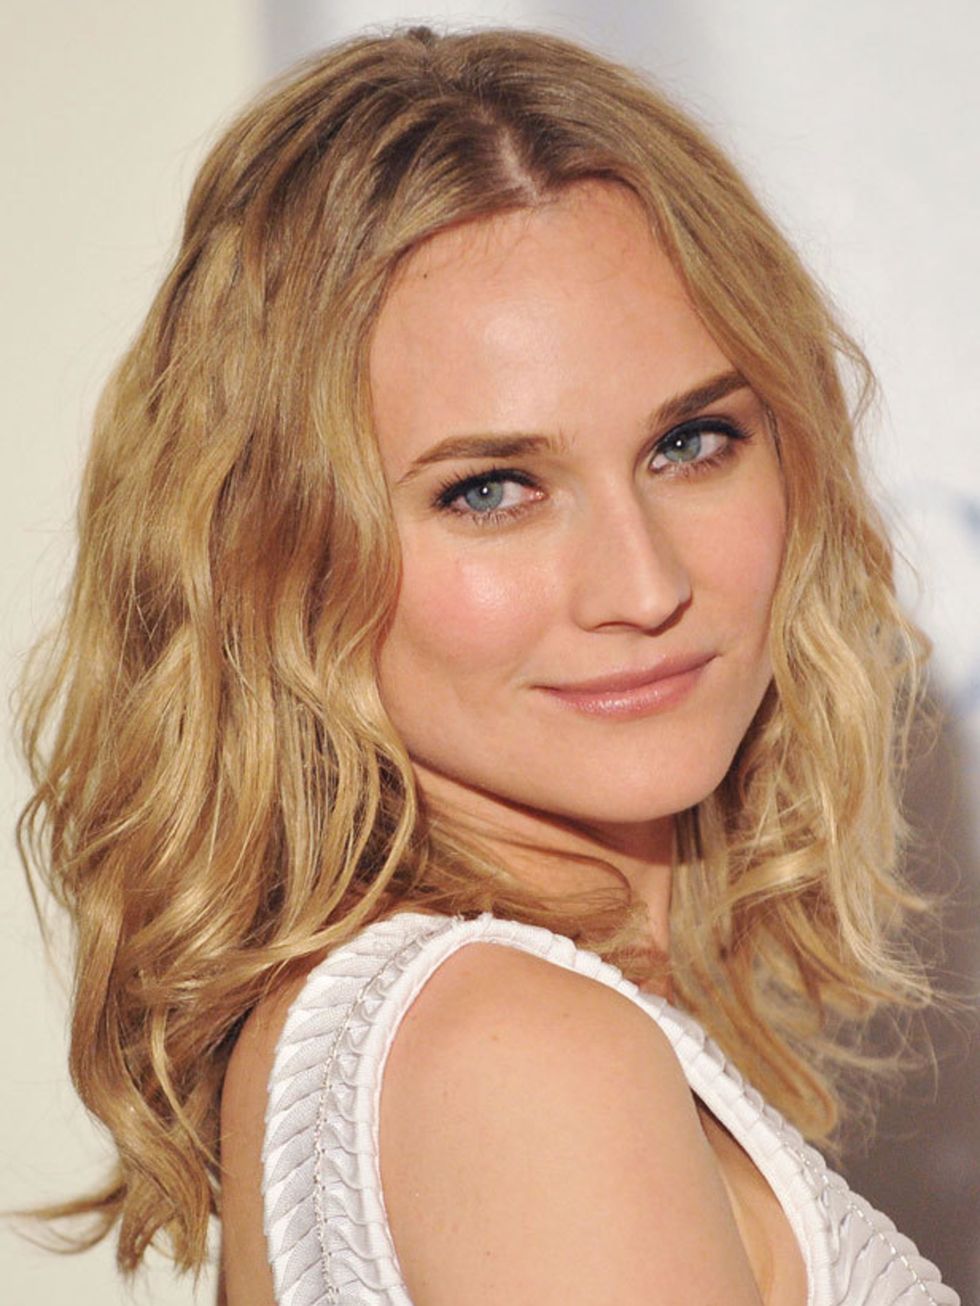 <p><a href="http://www.elleuk.com/news/Beauty-News/diane-kruger-is-l-oreal-s-new-worldwide-spokesperson/%28gid%29/451533">Click here to read more about L'Oreal</a></p>